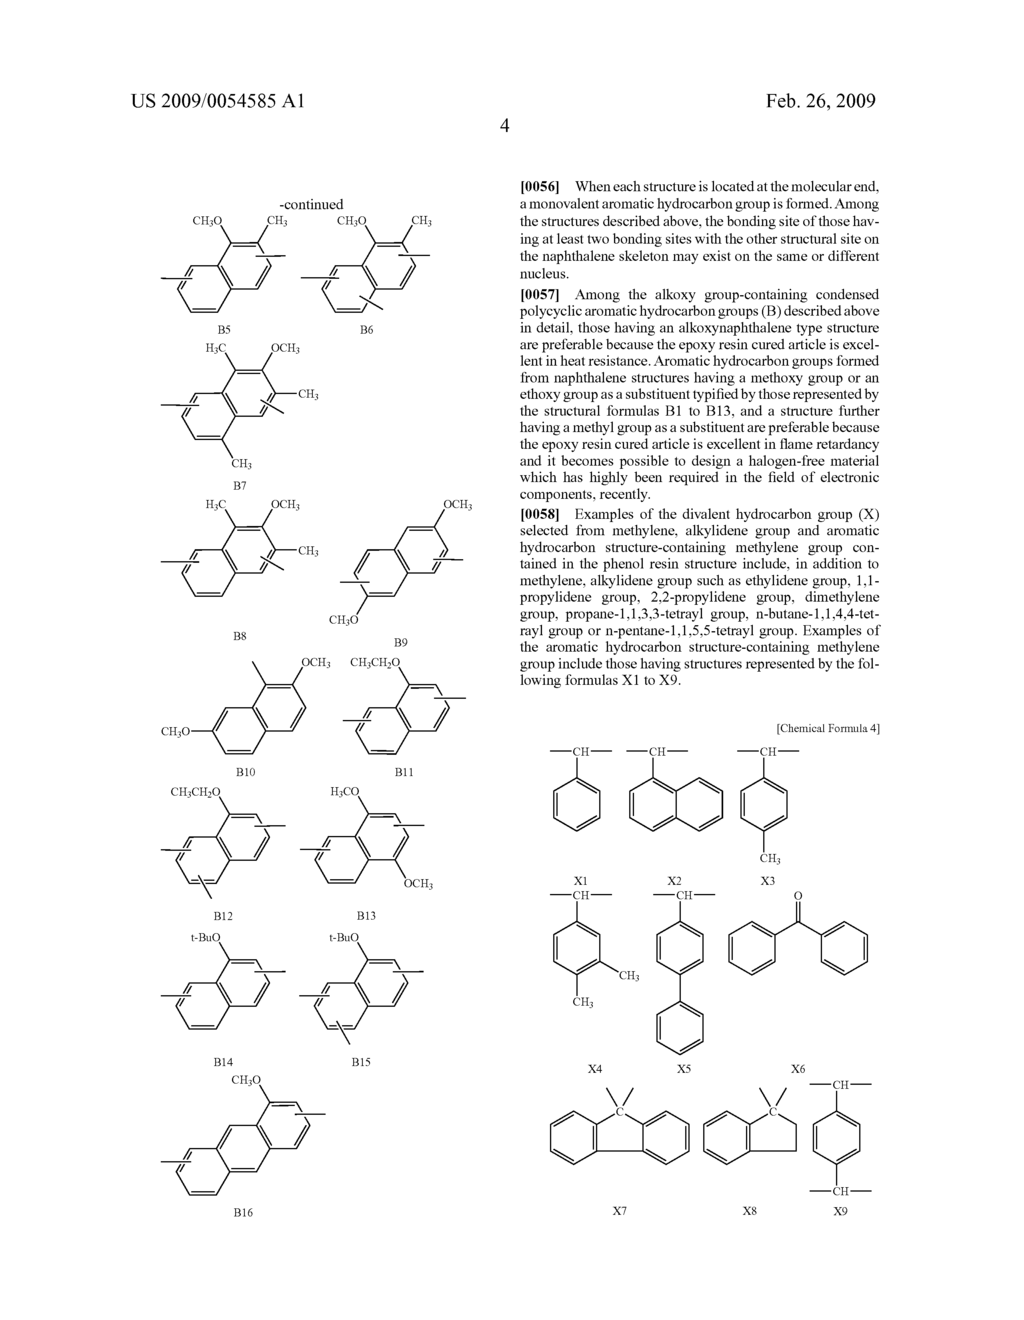 EPOXY RESIN COMPOSITION AND CURED ARTICLE THEREOF, SEMICONDUCTOR ENCAPSULATION MATERIAL, NOVEL PHENOL RESIN, AND NOVEL EPOXY RESIN - diagram, schematic, and image 21